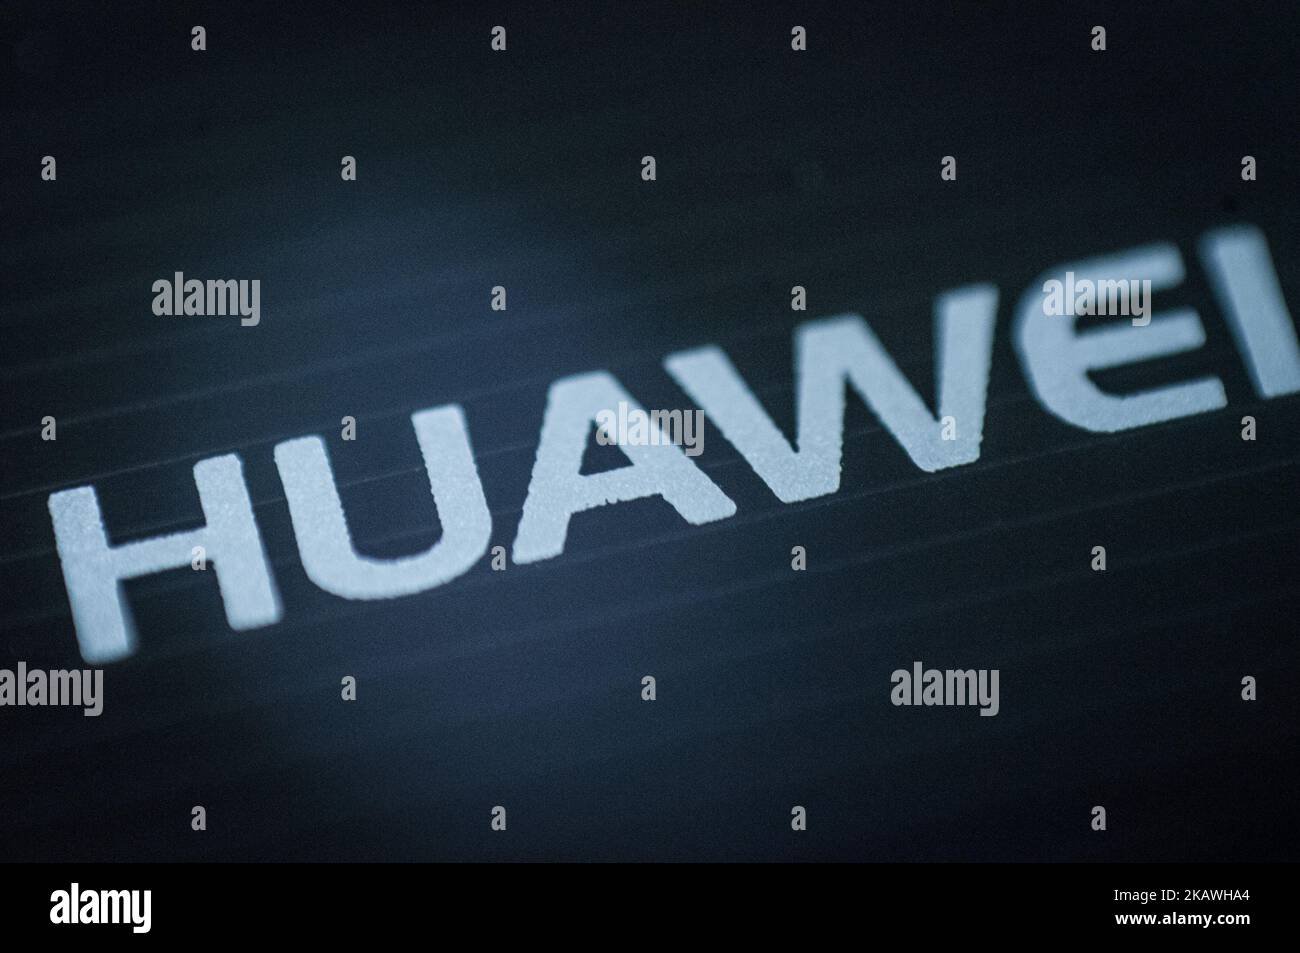 The Huawei logo is seen on a mobile phone on February 12, 2018. Chinese Huawei is the worlds thrid largest phone maker after Samsung and Apple. (Photo by Jaap Arriens/NurPhoto) Stock Photo